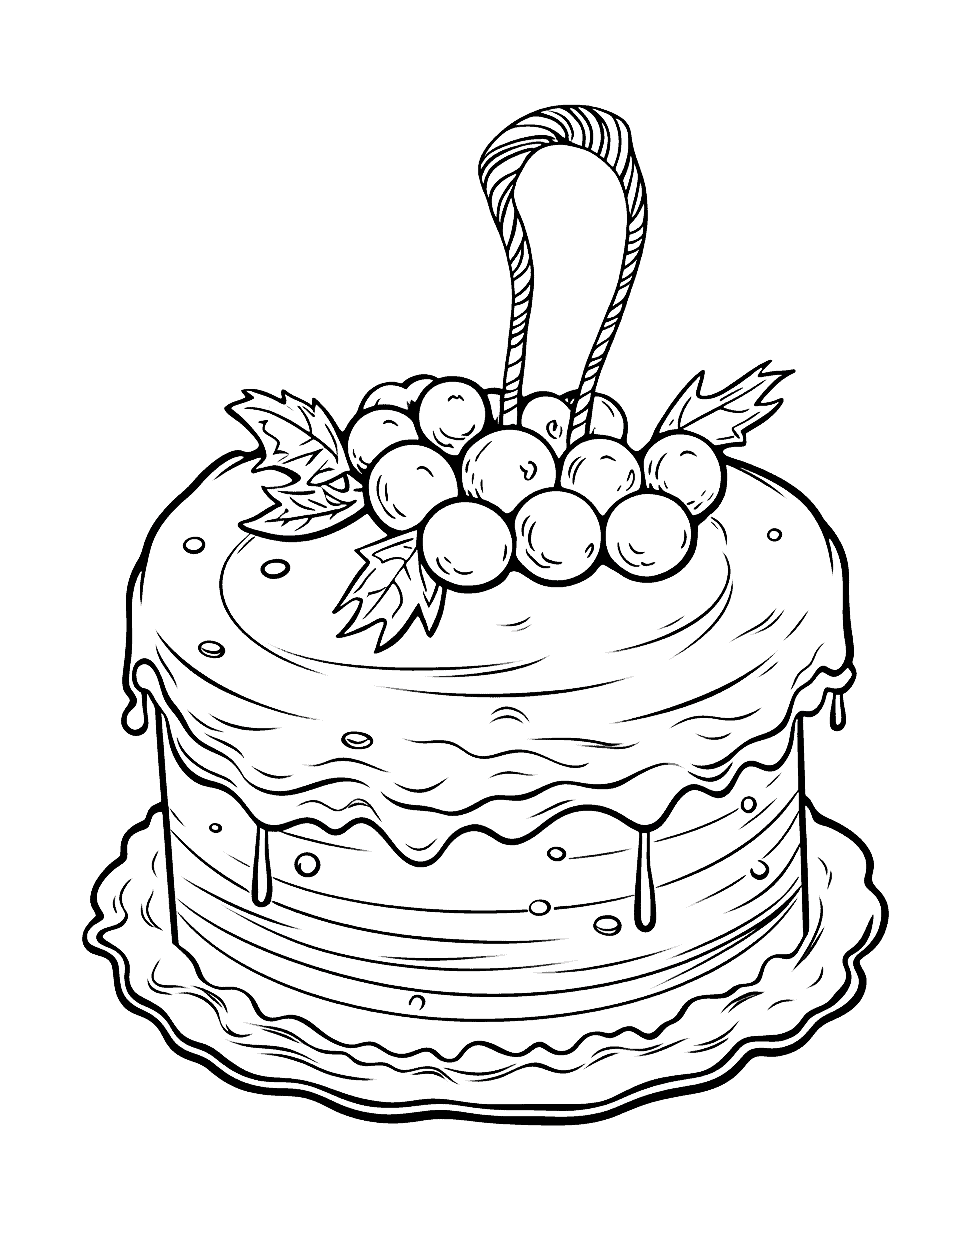 Fruitcake Fun Christmas Coloring Page - A festive fruitcake with cherries, nuts, and a light dusting of powdered sugar.